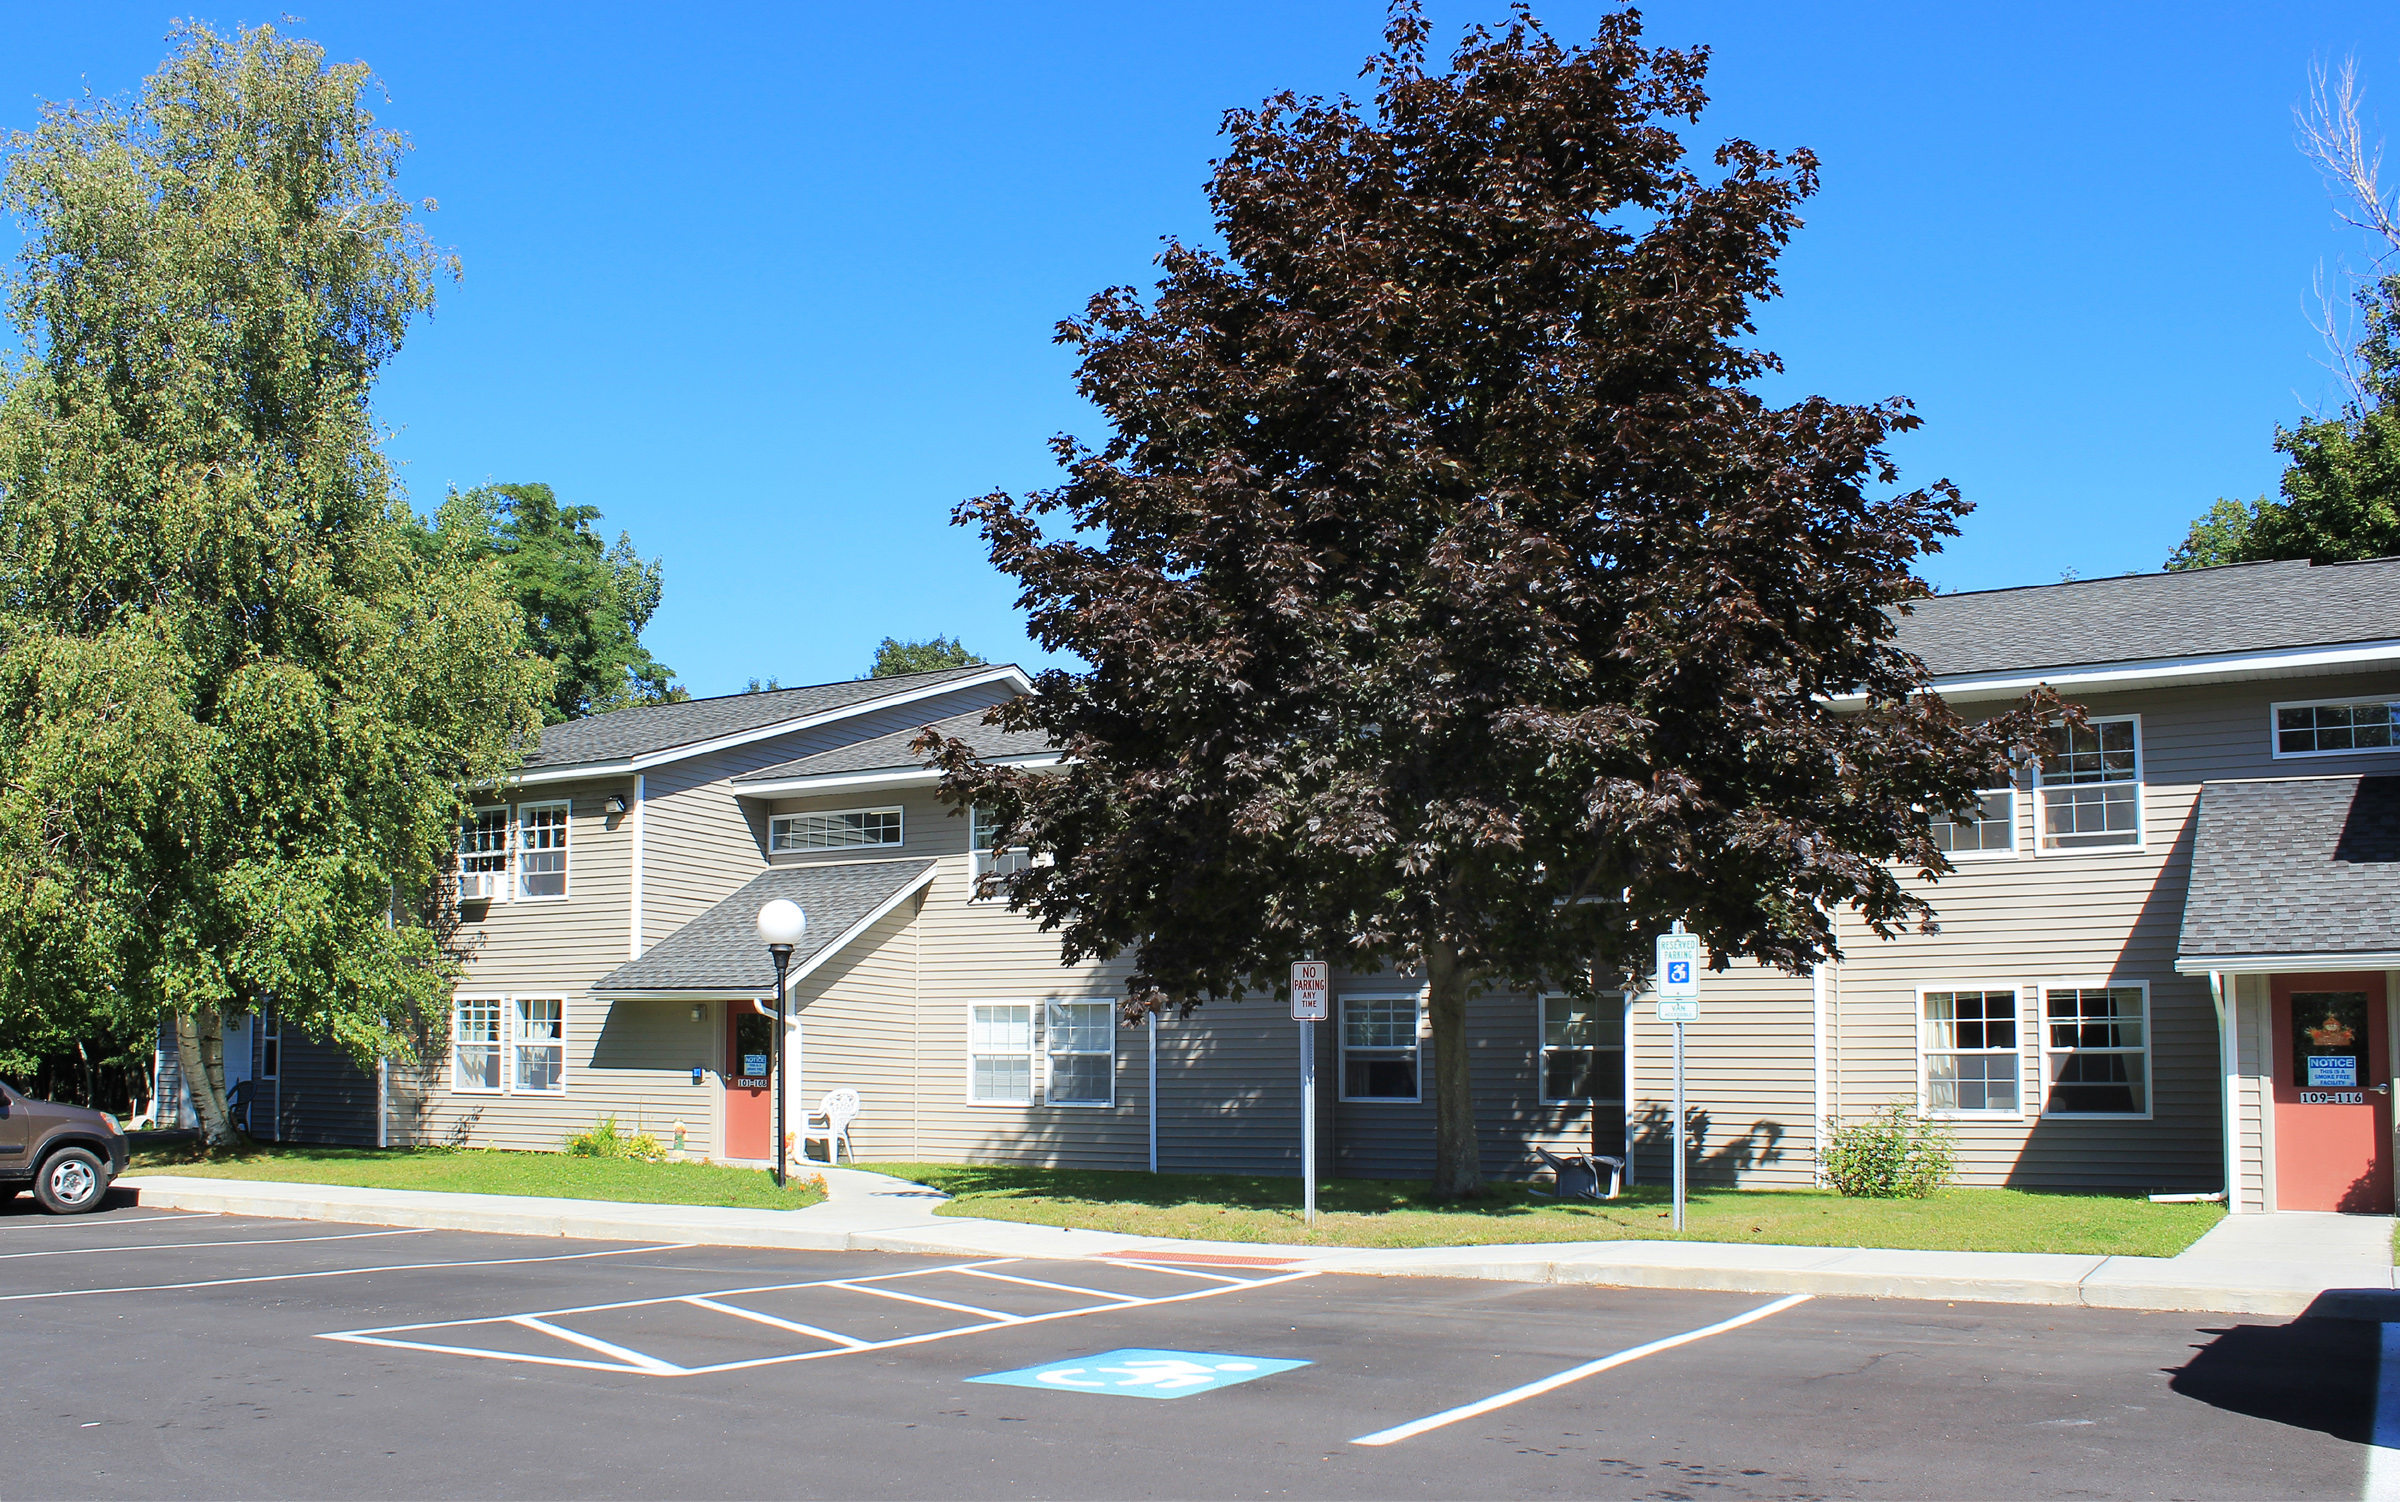 property management company client list syracuse ny full view image of fair haven senior apartments